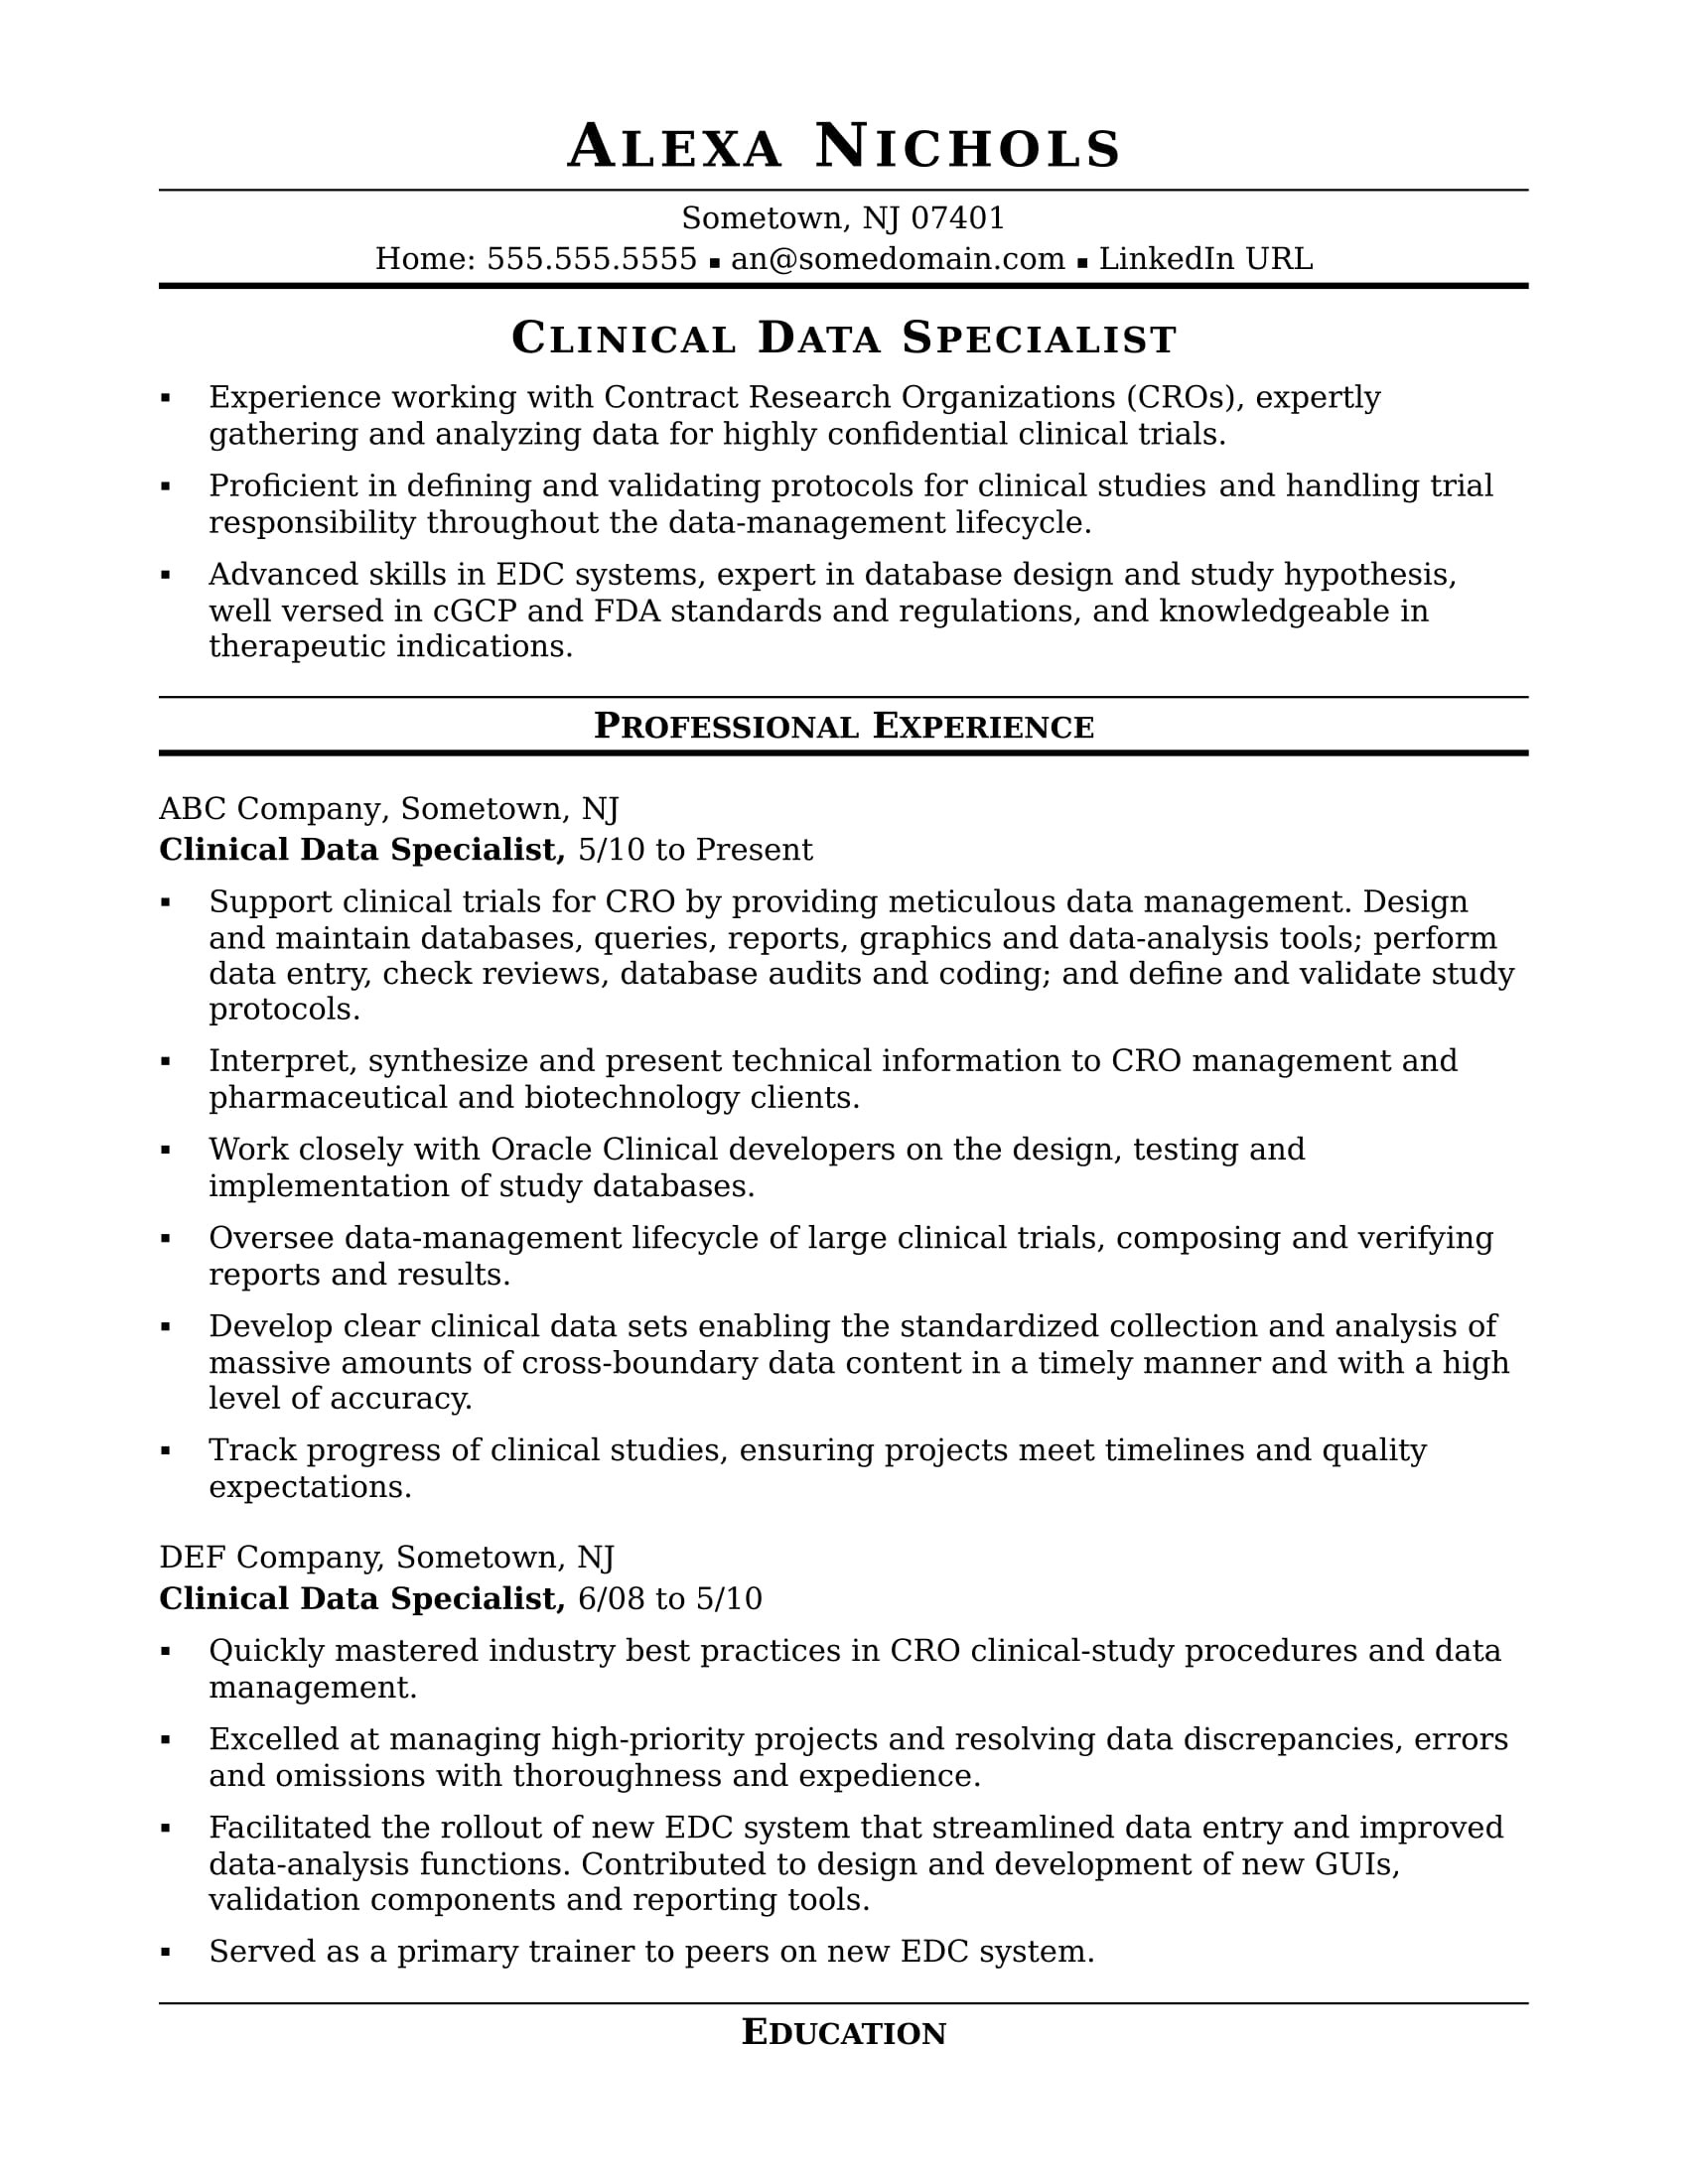 Sample Resume for Senior Contract Specialist Clinical Data Specialist Resume Sample Monster.com